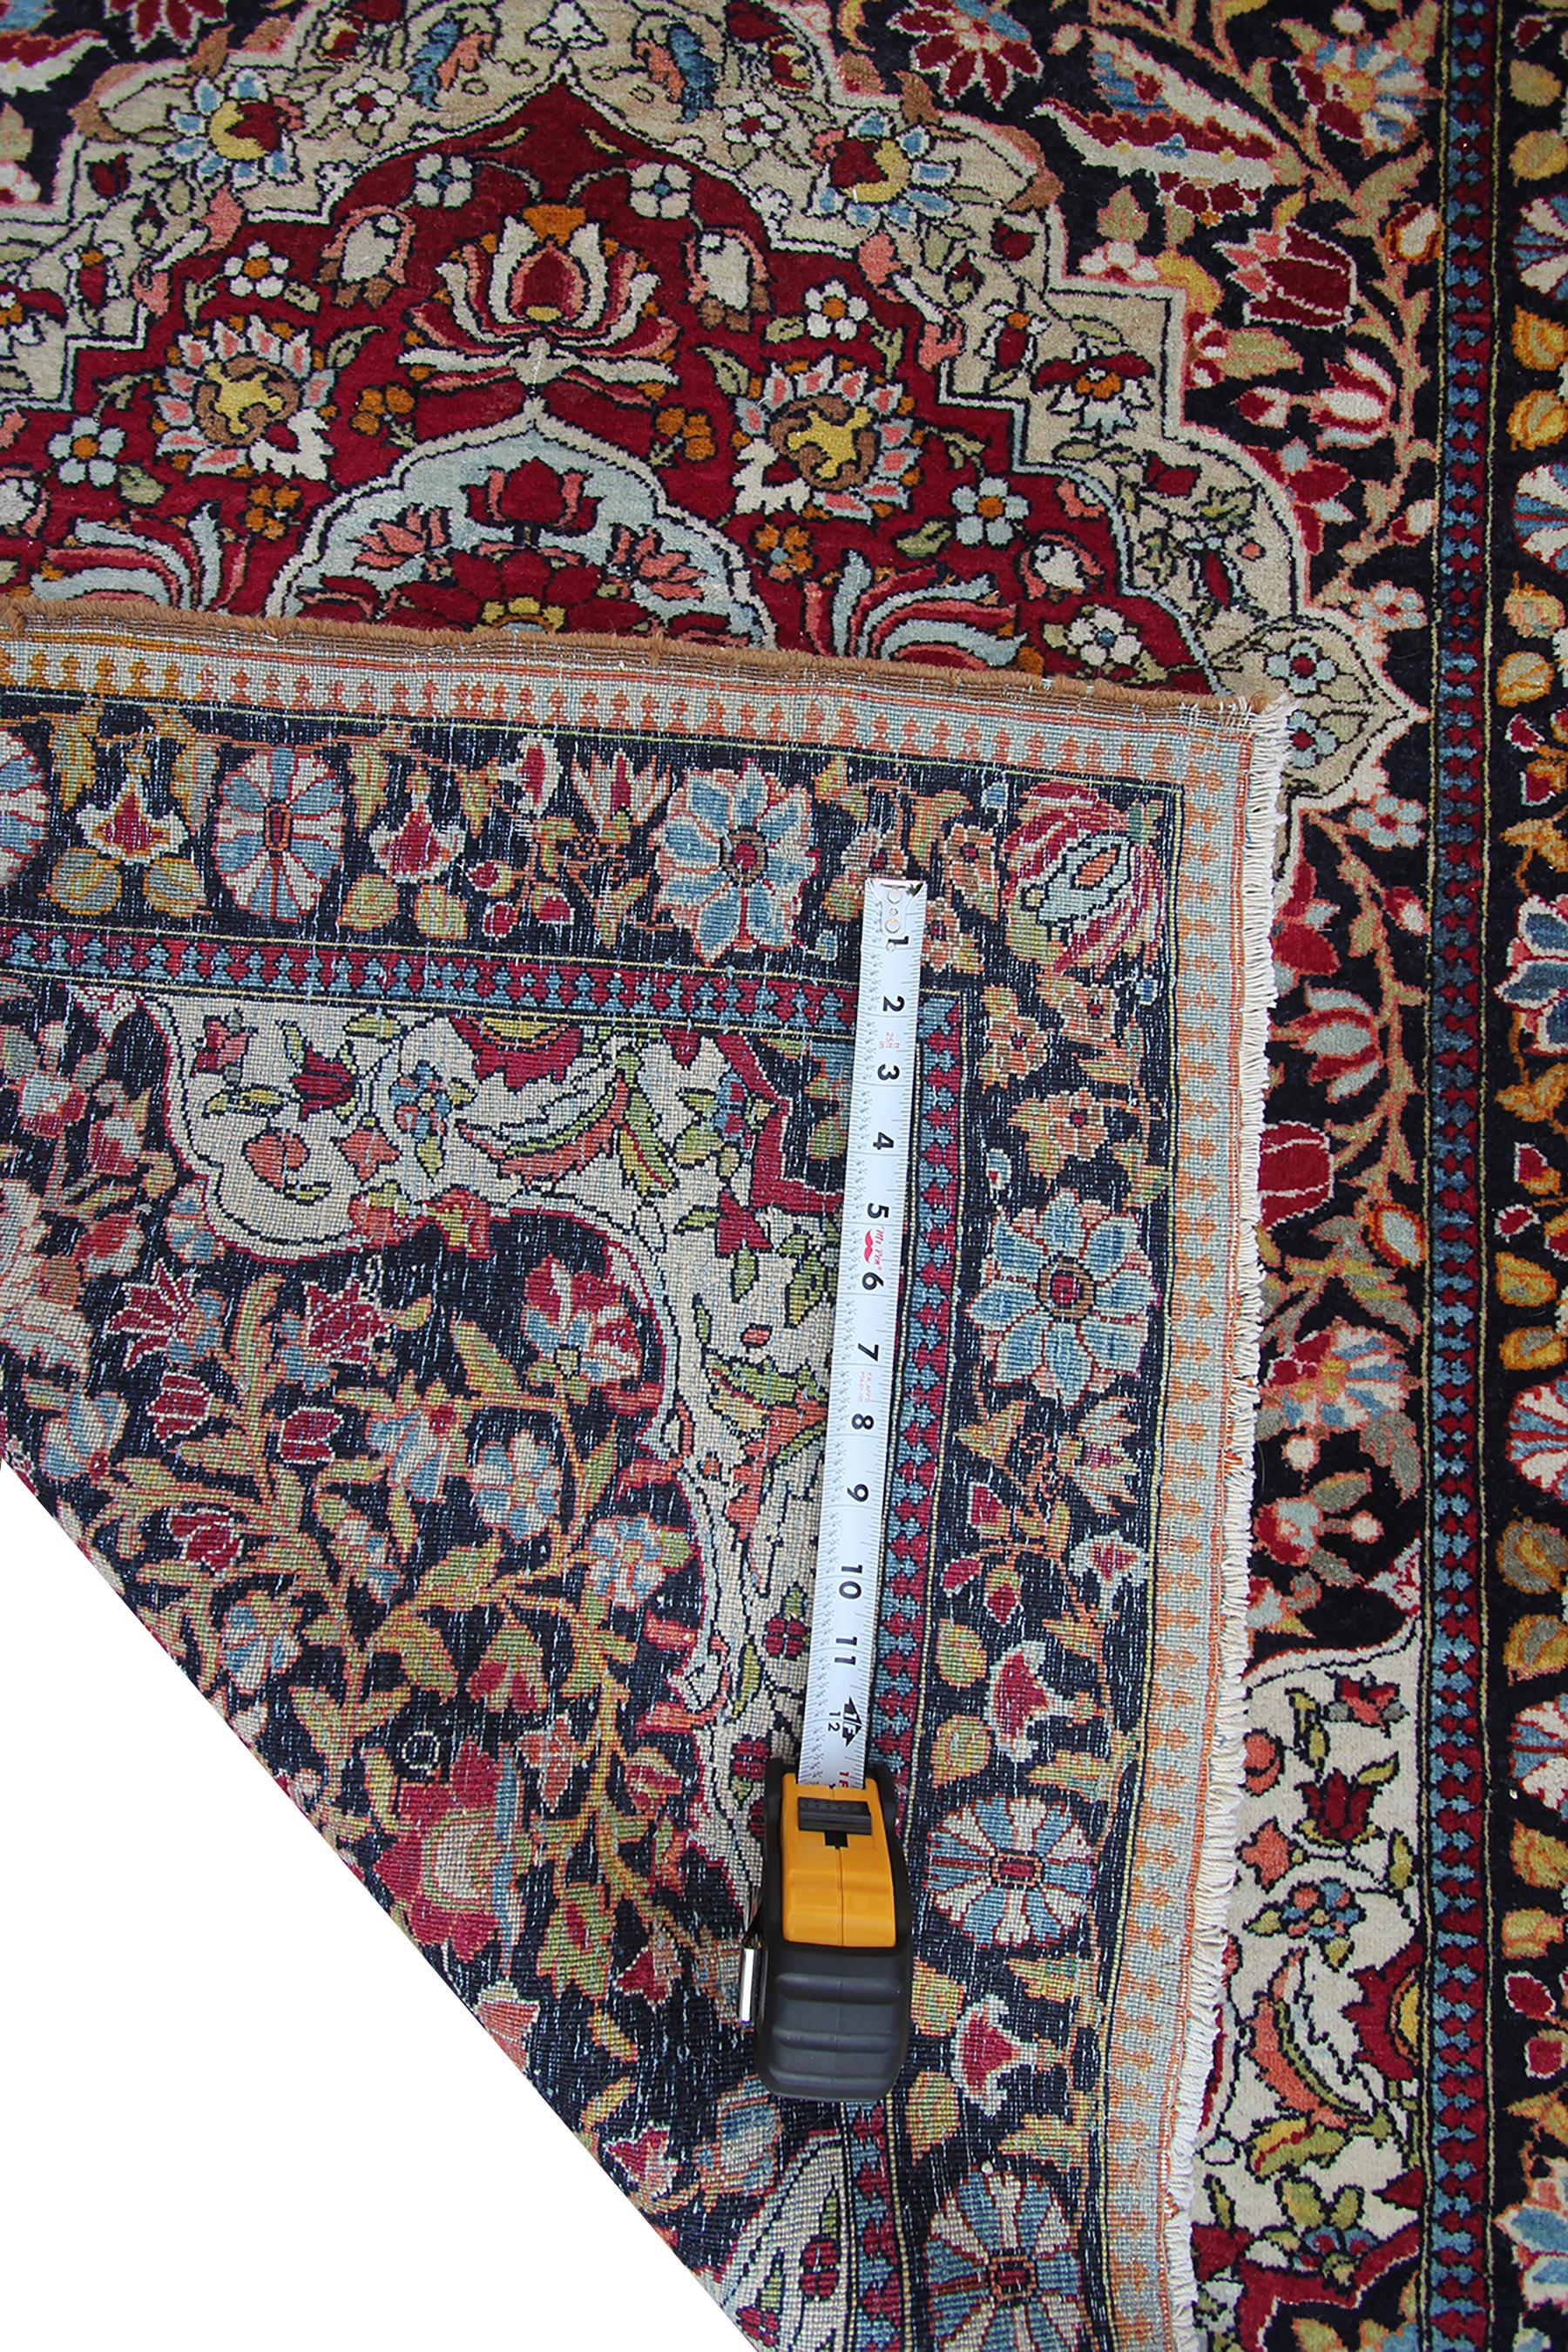 Black High Quality Antique Persian Isfahan Rug Artisan Work 4x5 107x153cm For Sale 3